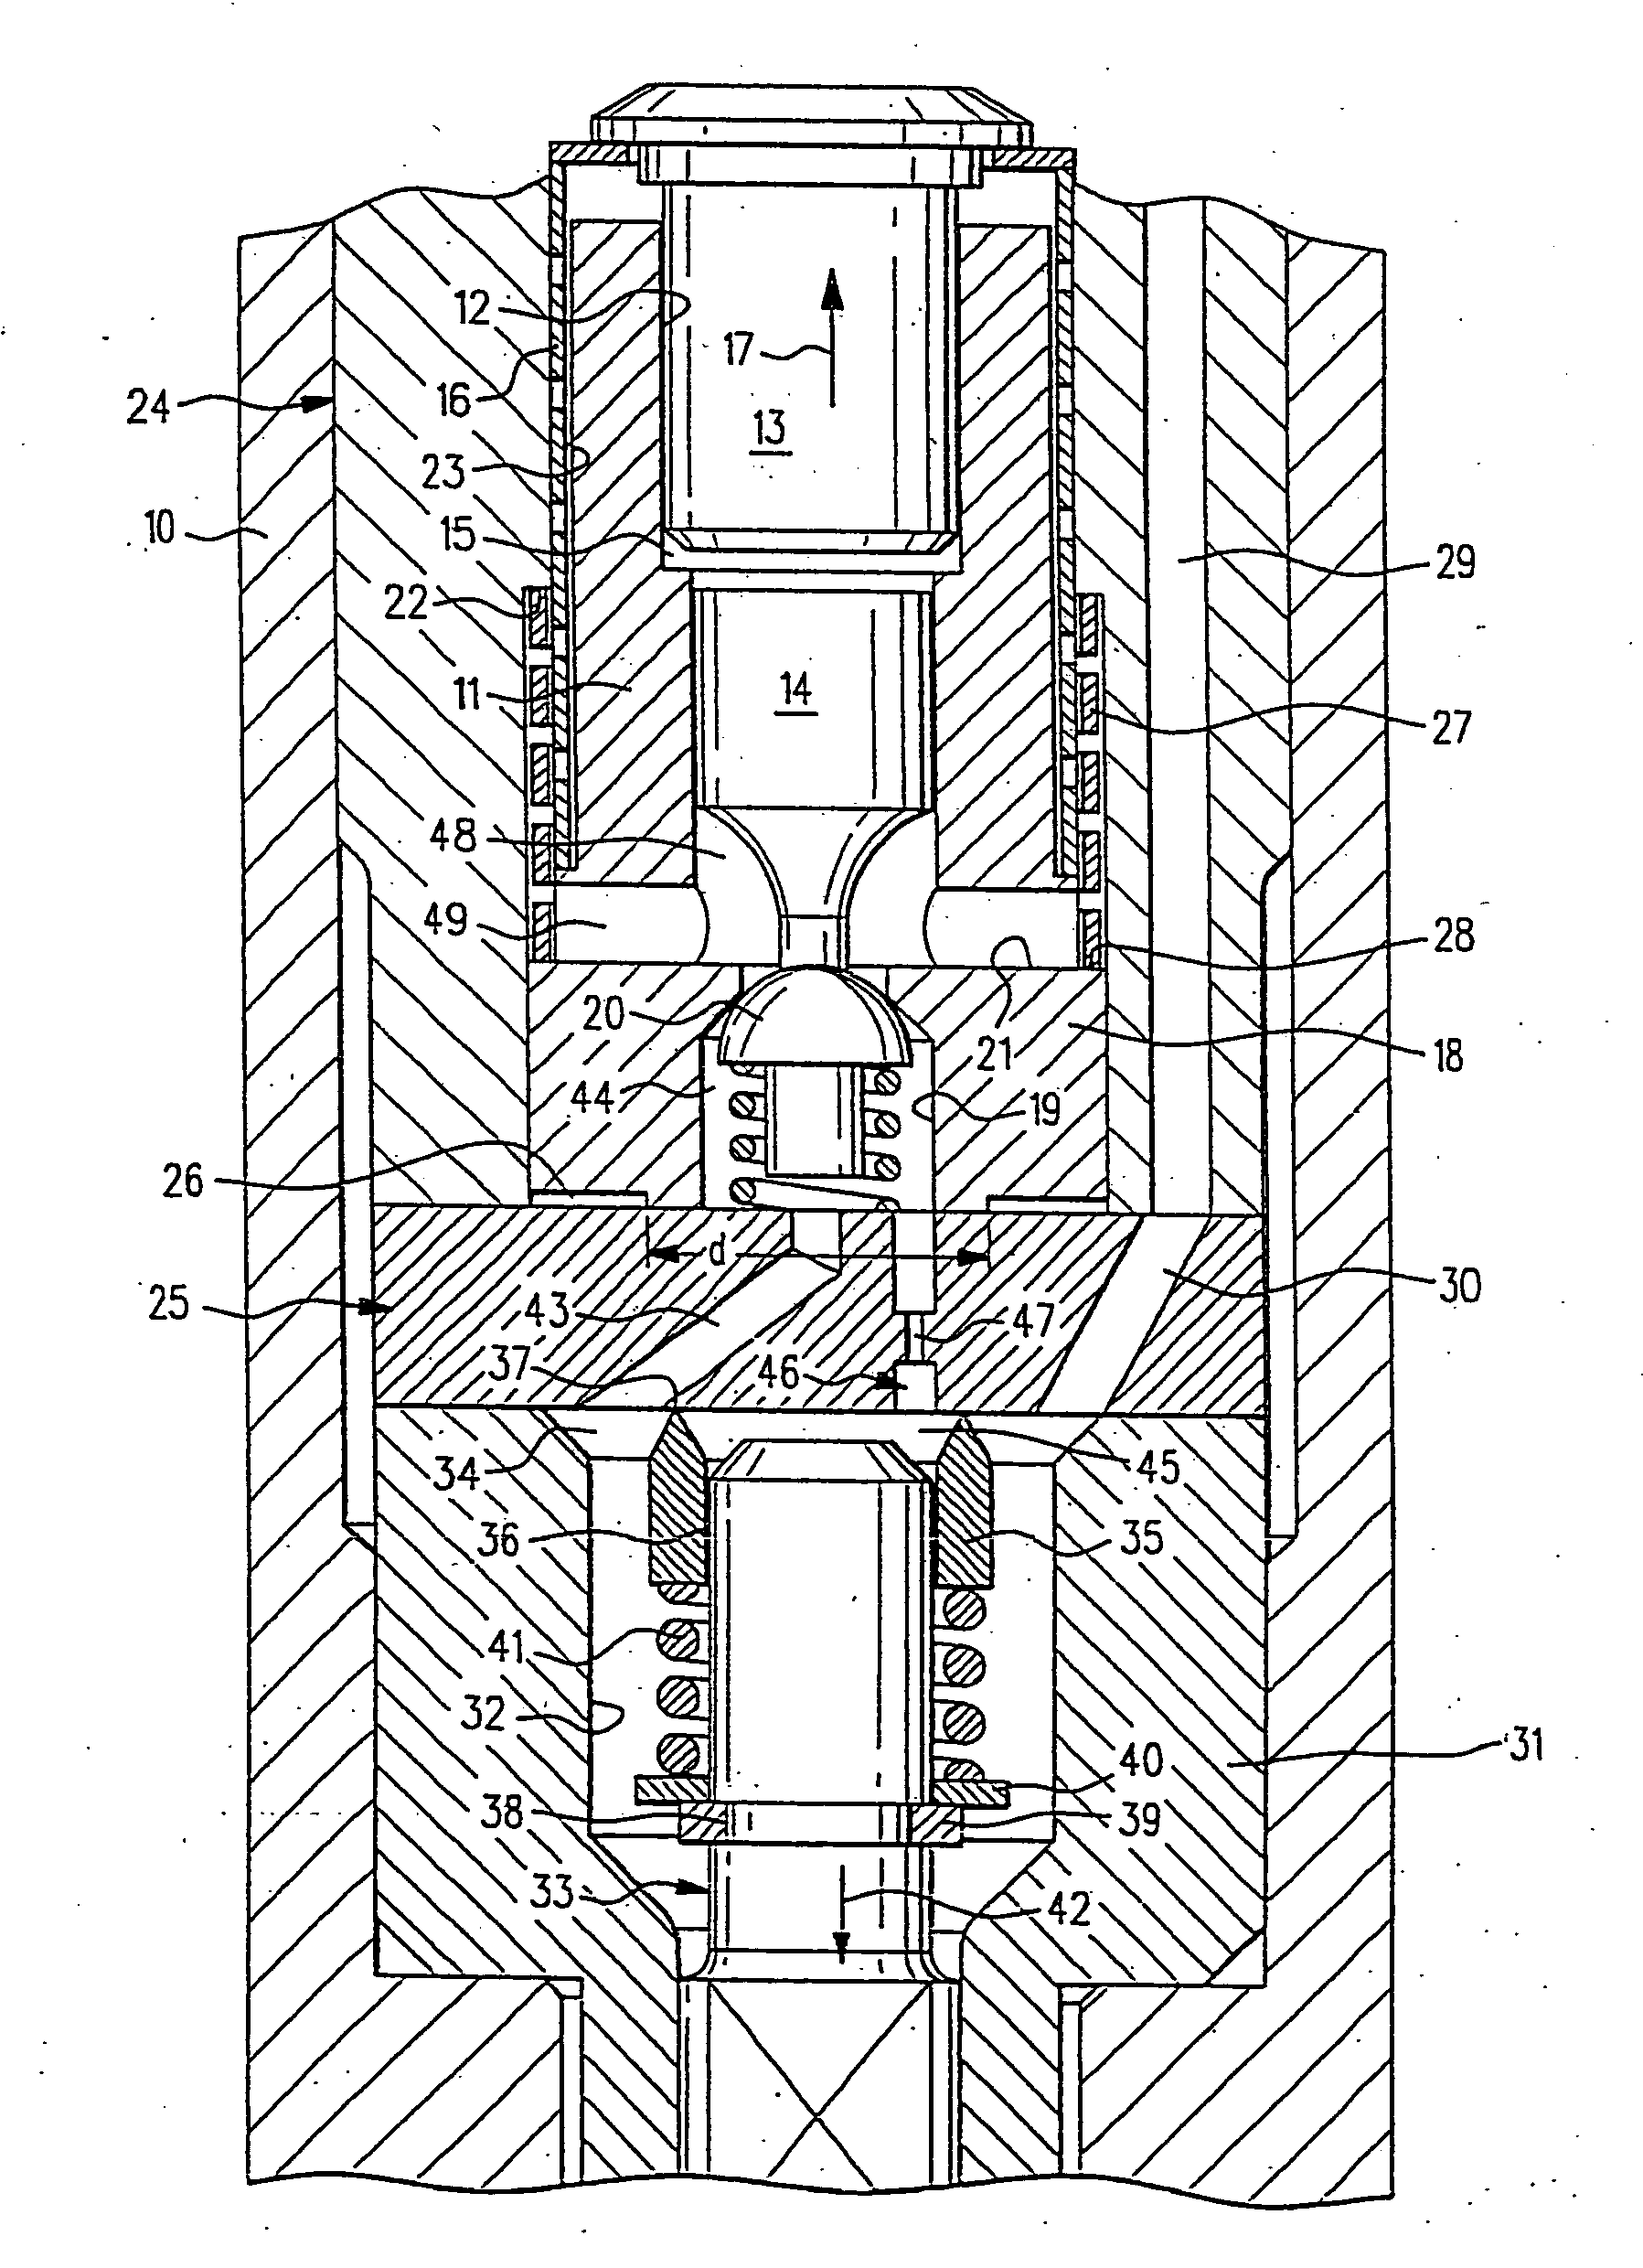 Injector for injecting fuel into combustion chambers of internal combustion engines, in particular a piezoelectric-actuator-controlled common rail injector